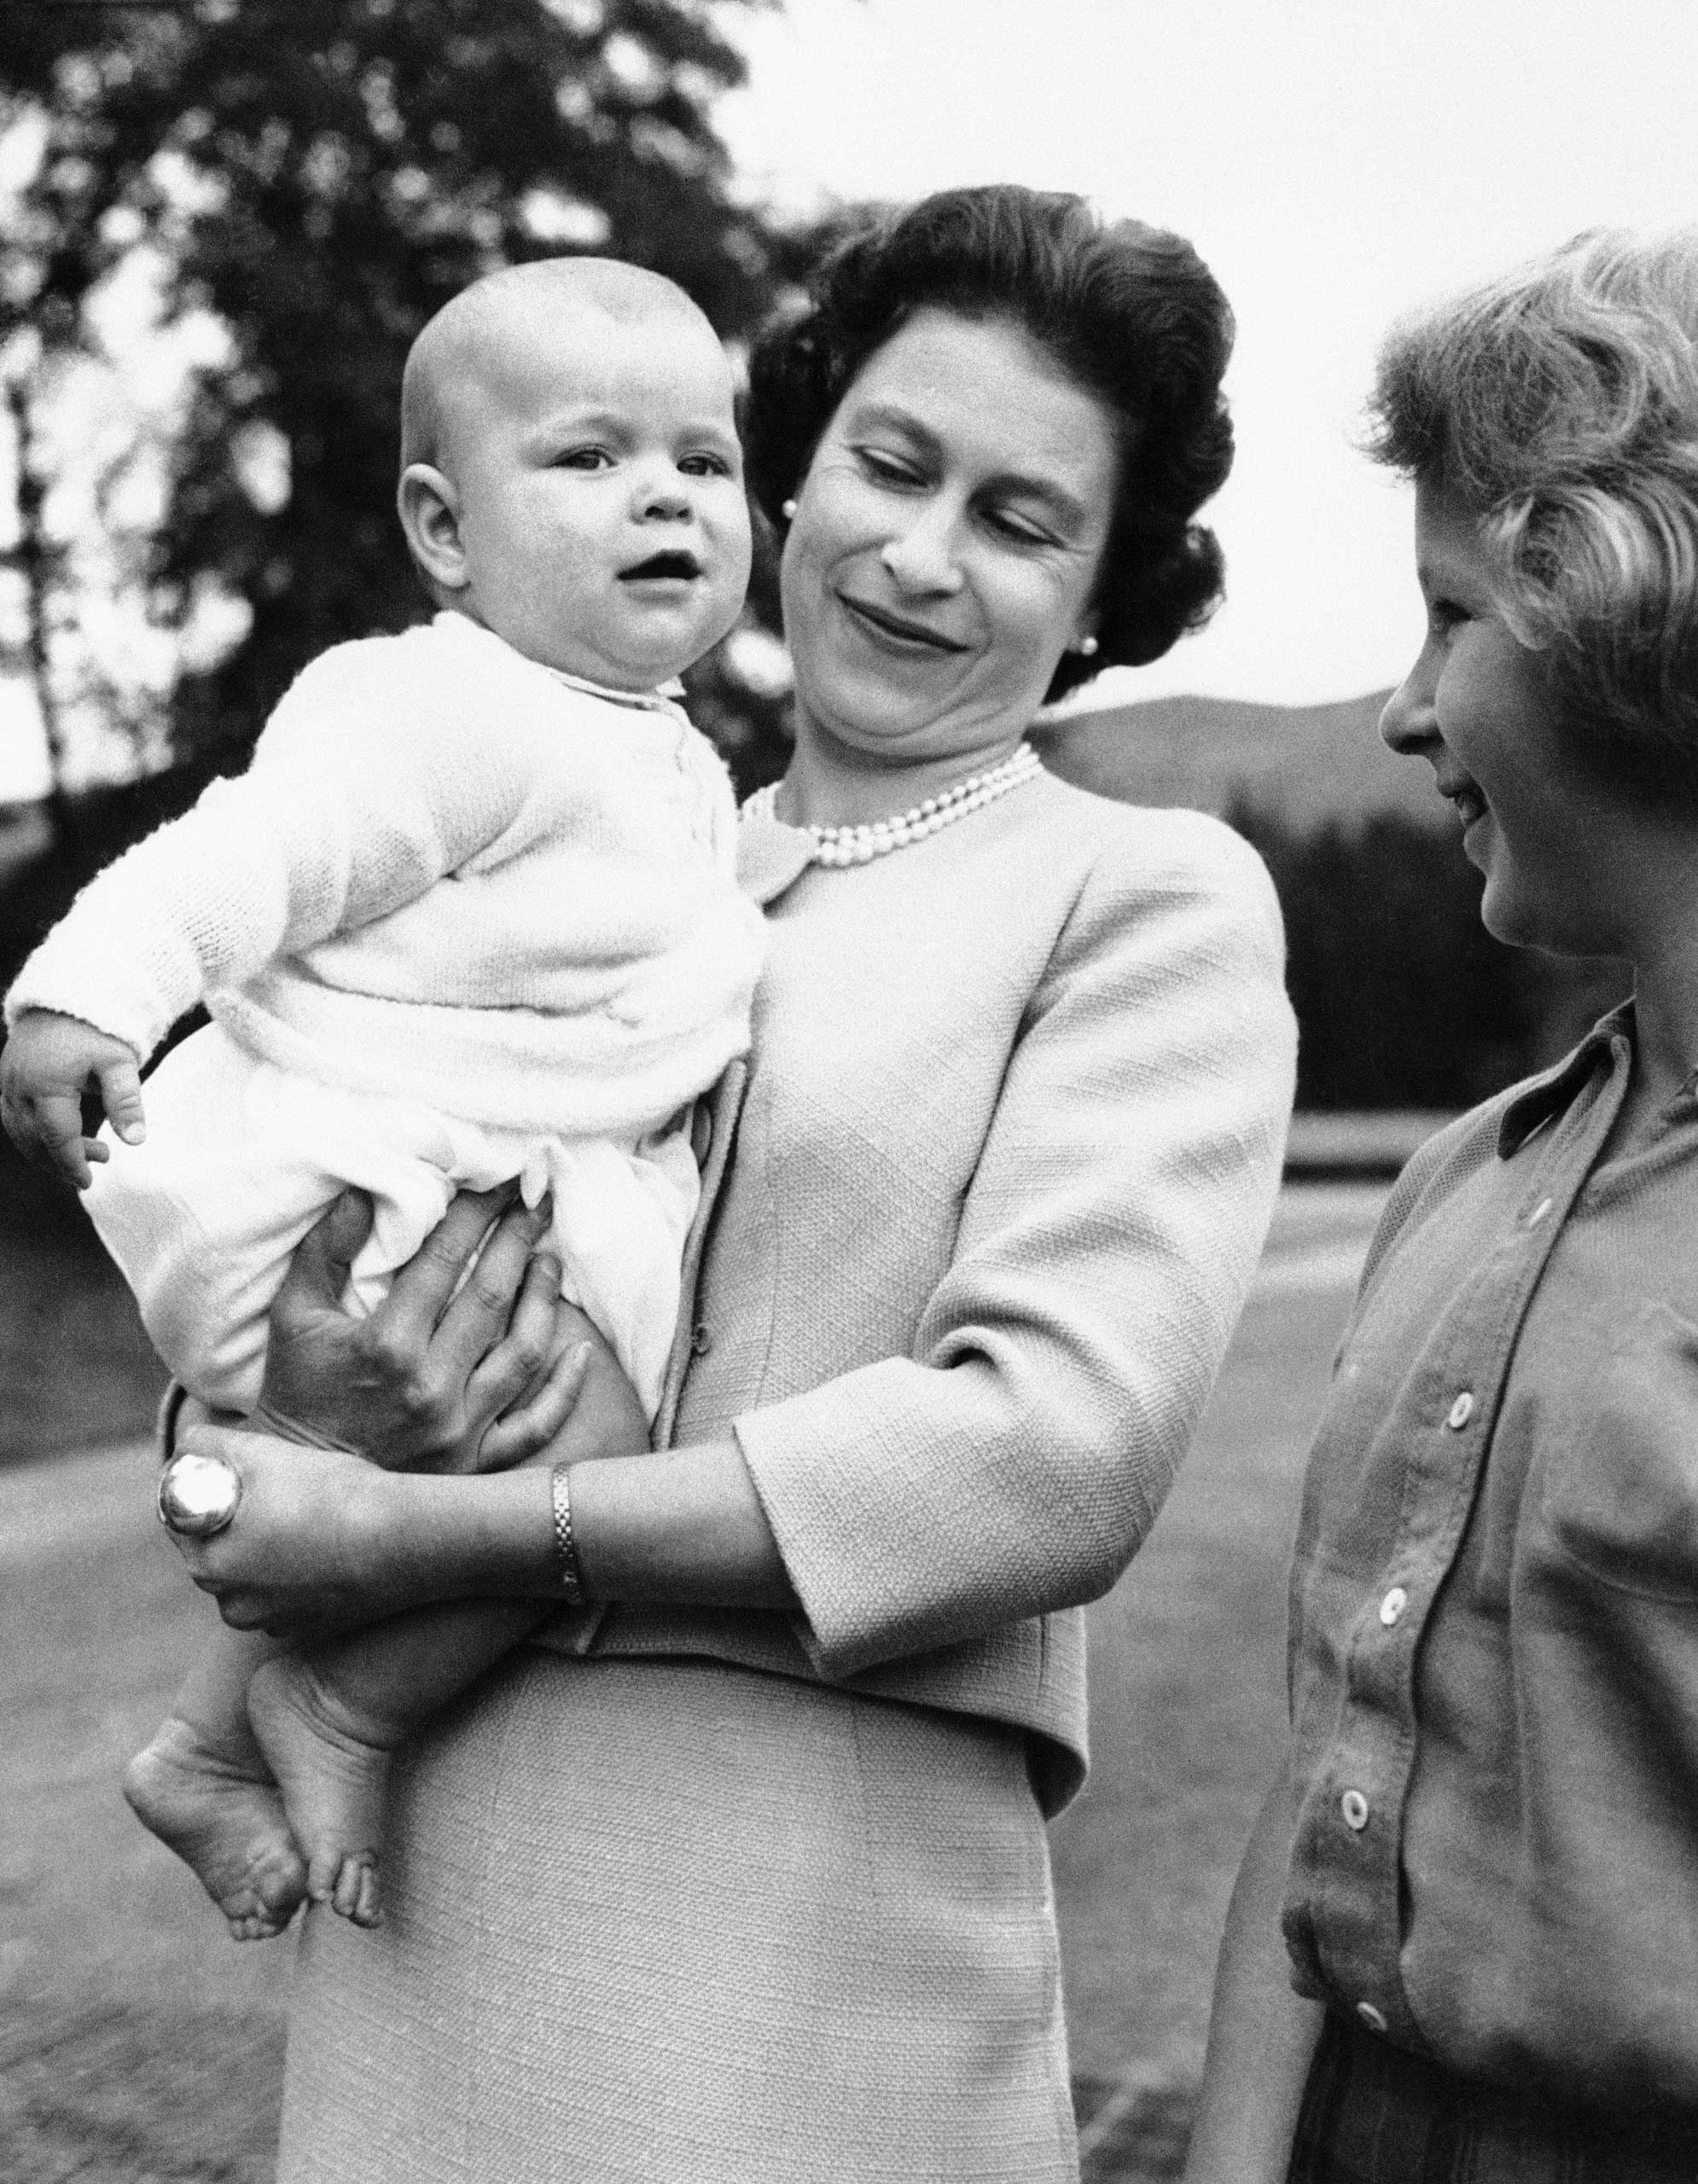 She already had an heir. Here's Queen Elizabeth with the spare: a chubby, 6-month-old Prince Andrew, in the grounds of Balmoral Castle, Scotland in 1960.